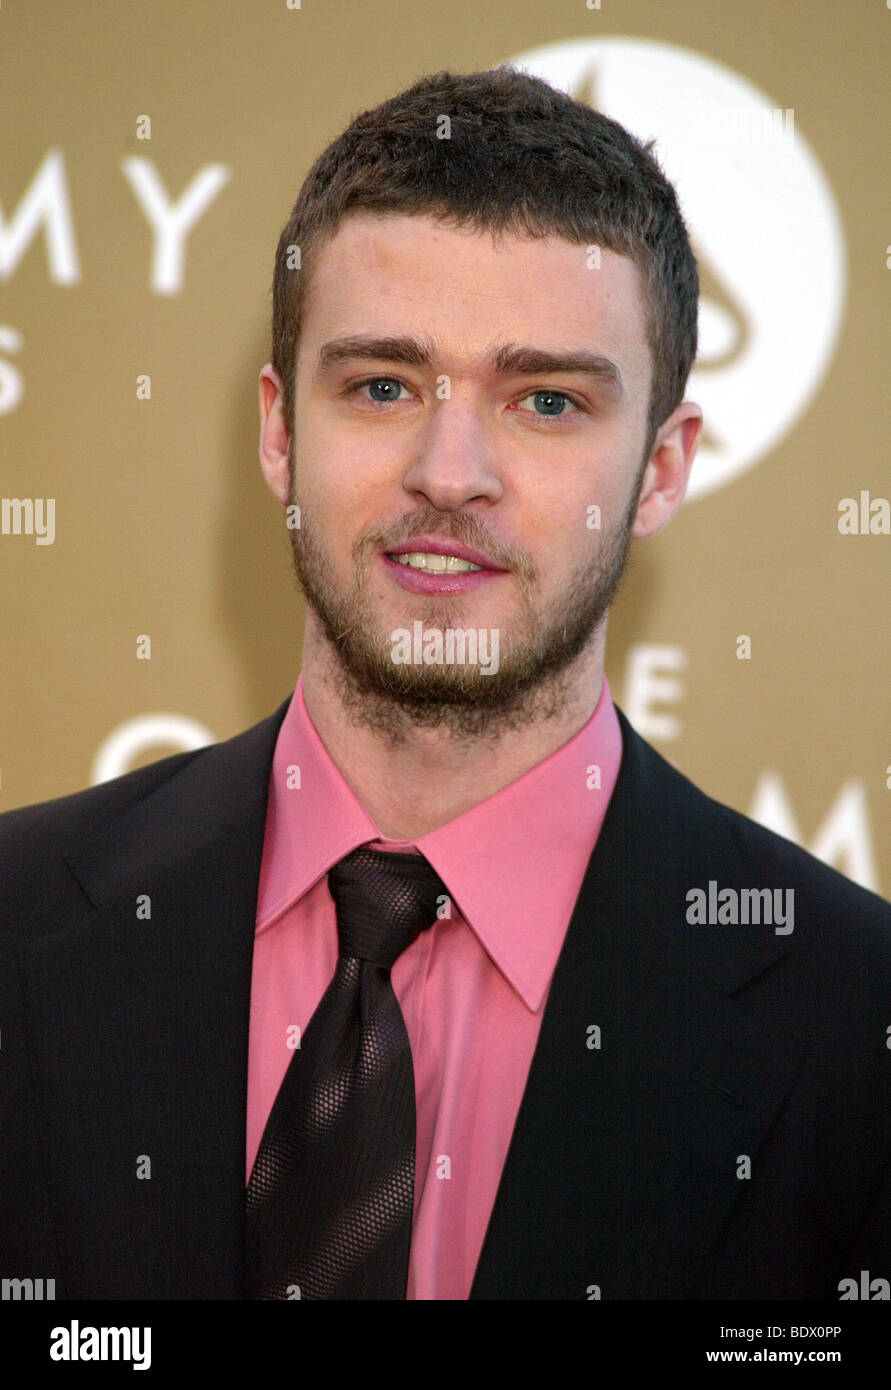 JUSTIN TIMBERLAKE - US pop musician and actor Stock Photo